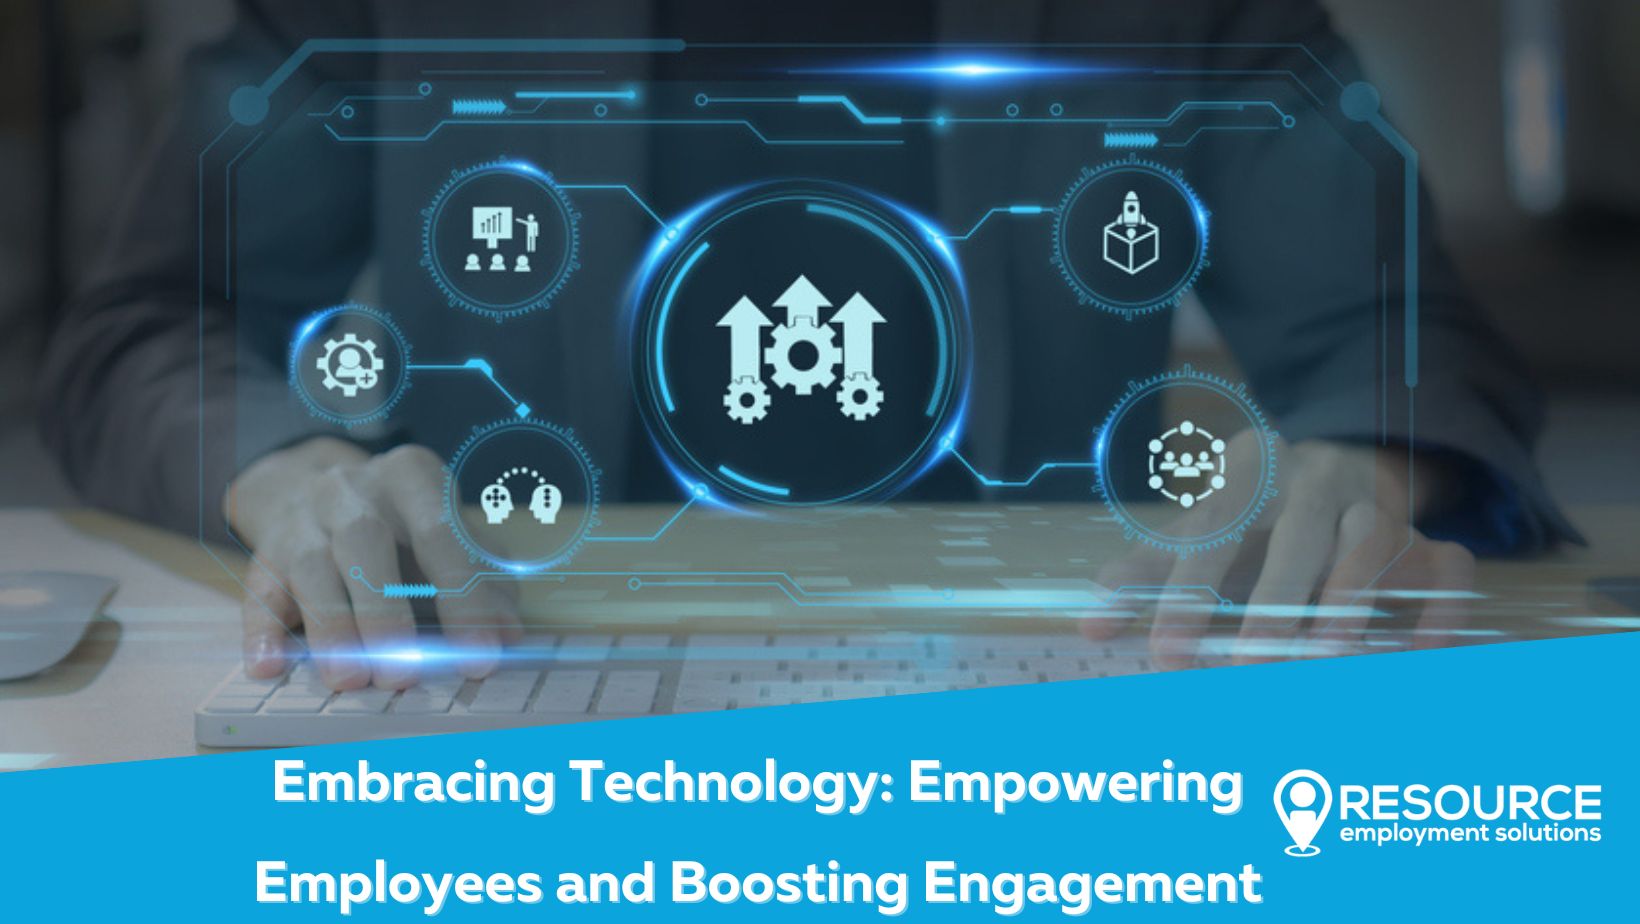 Embracing Technology: Empowering Employees and Boosting Engagement